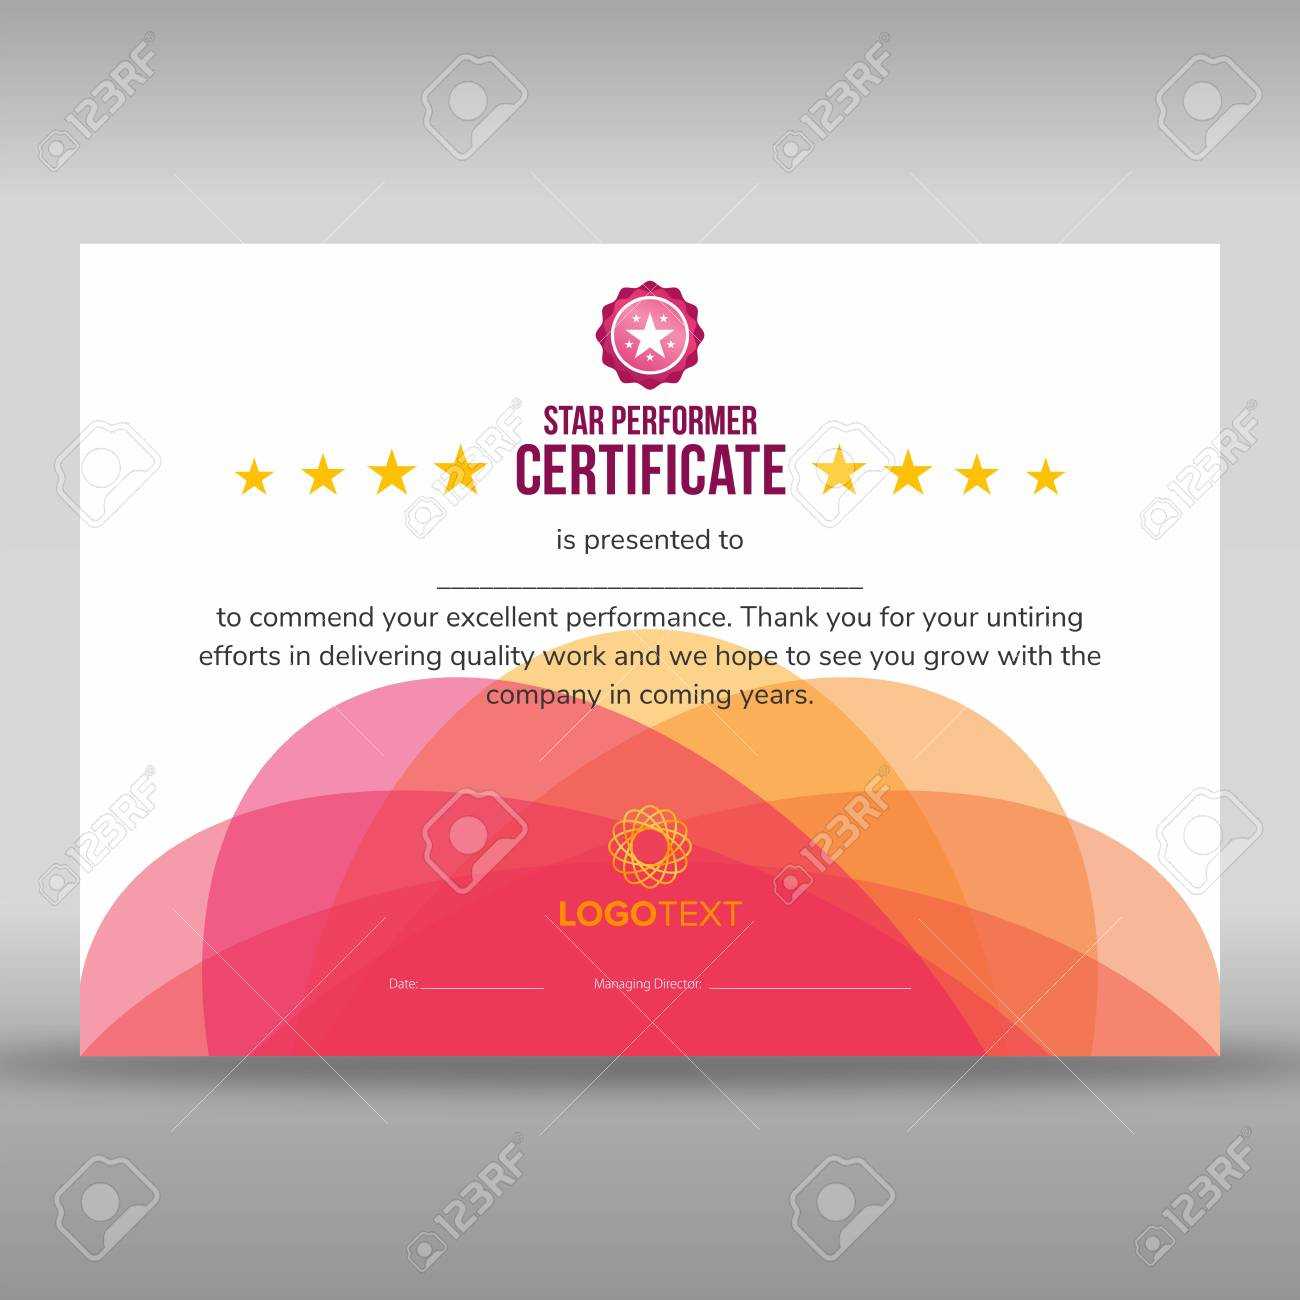 Abstract Creative Pink Star Performer Certificate Intended For Star Performer Certificate Templates